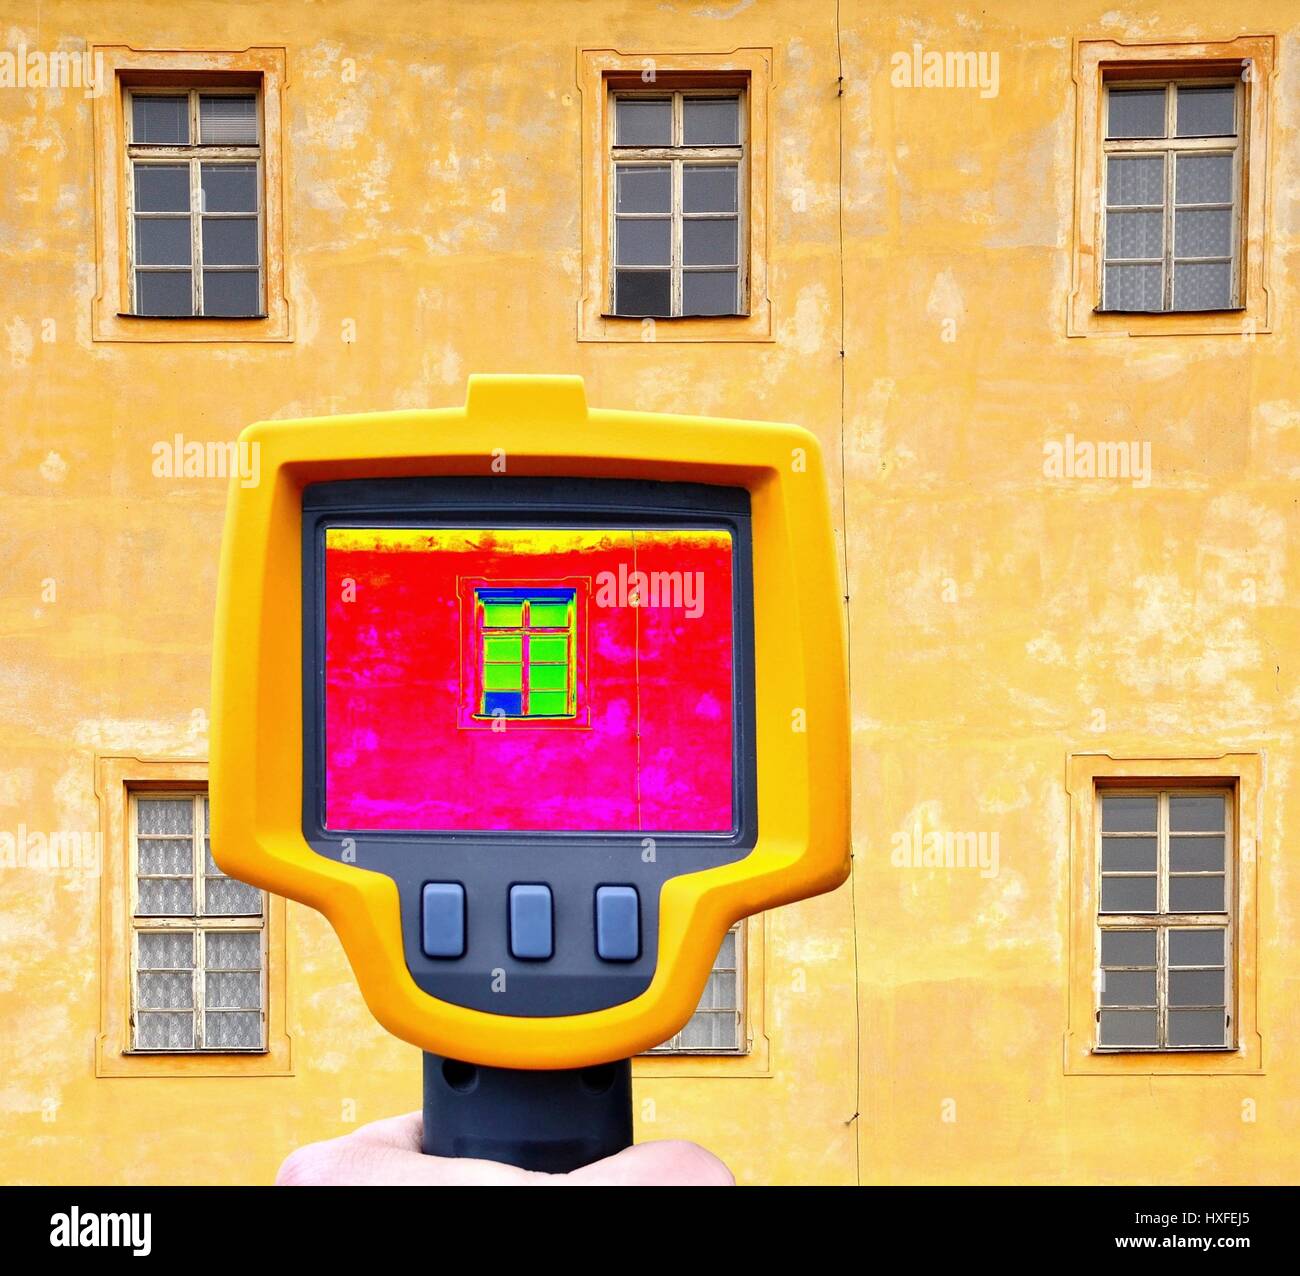 An infrared thermal imager showing building facade and window heat loss. Stock Photo